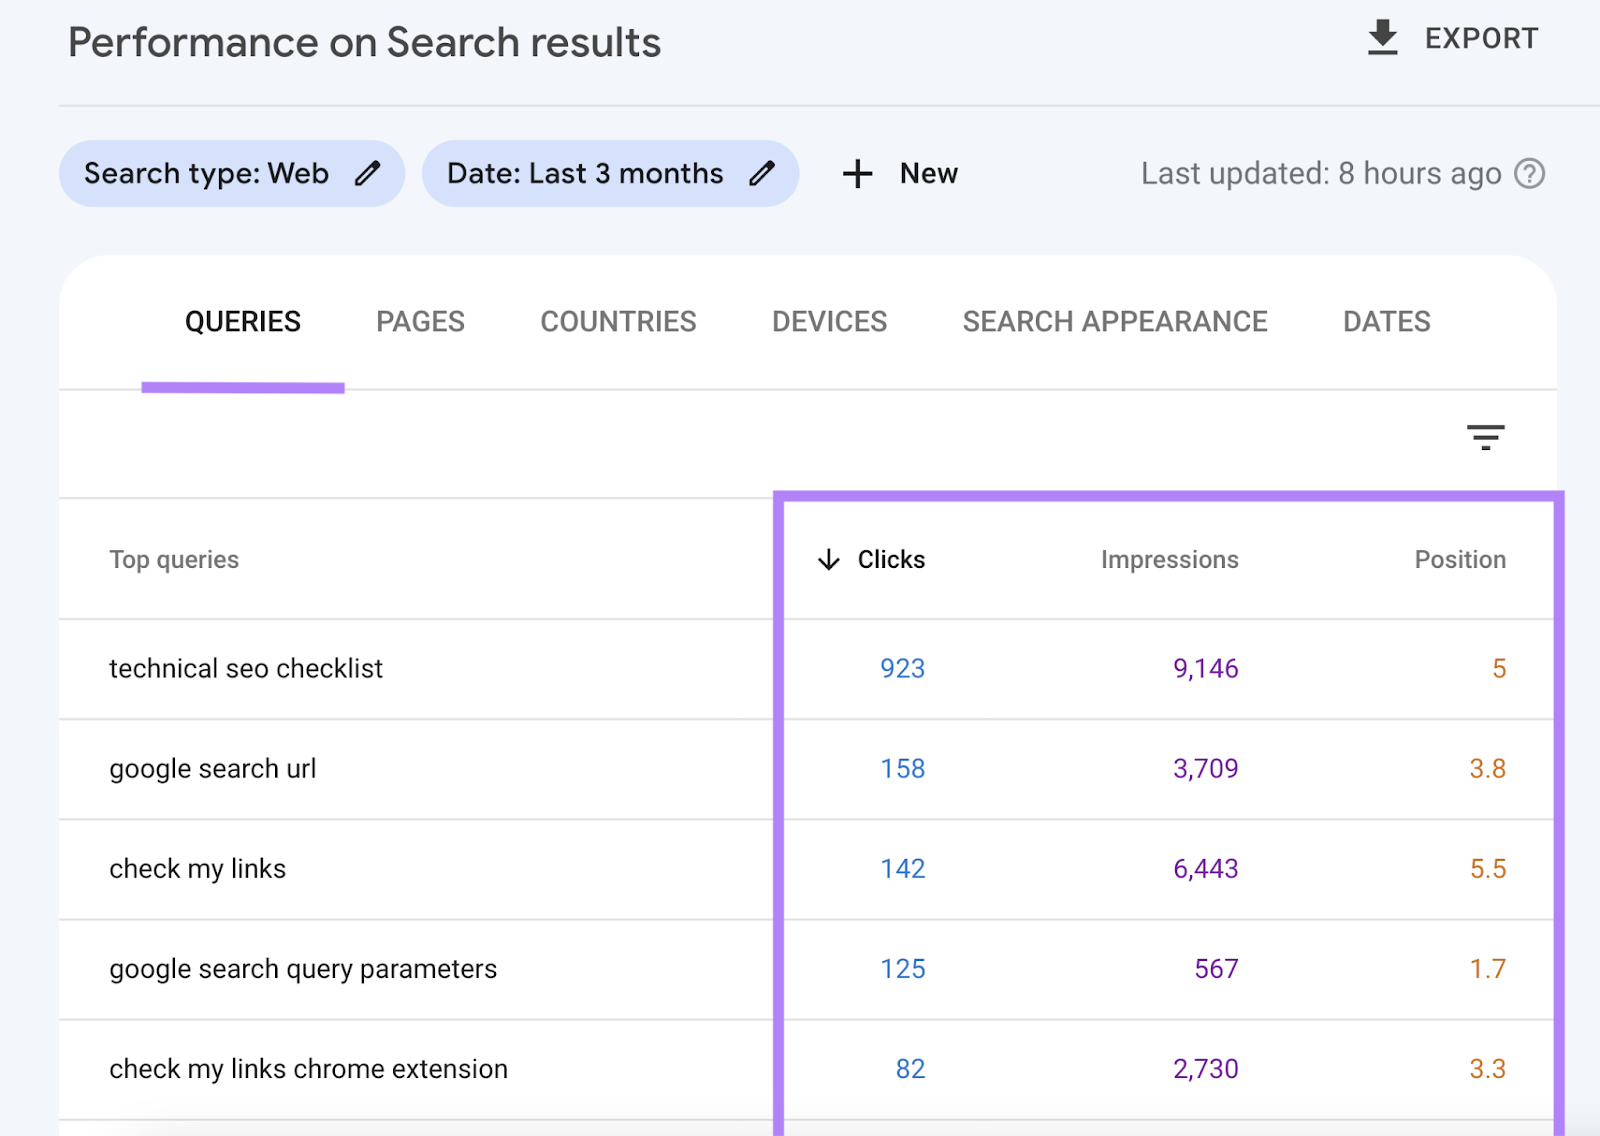 "Queries" section of the Performance on Search results report in GSC